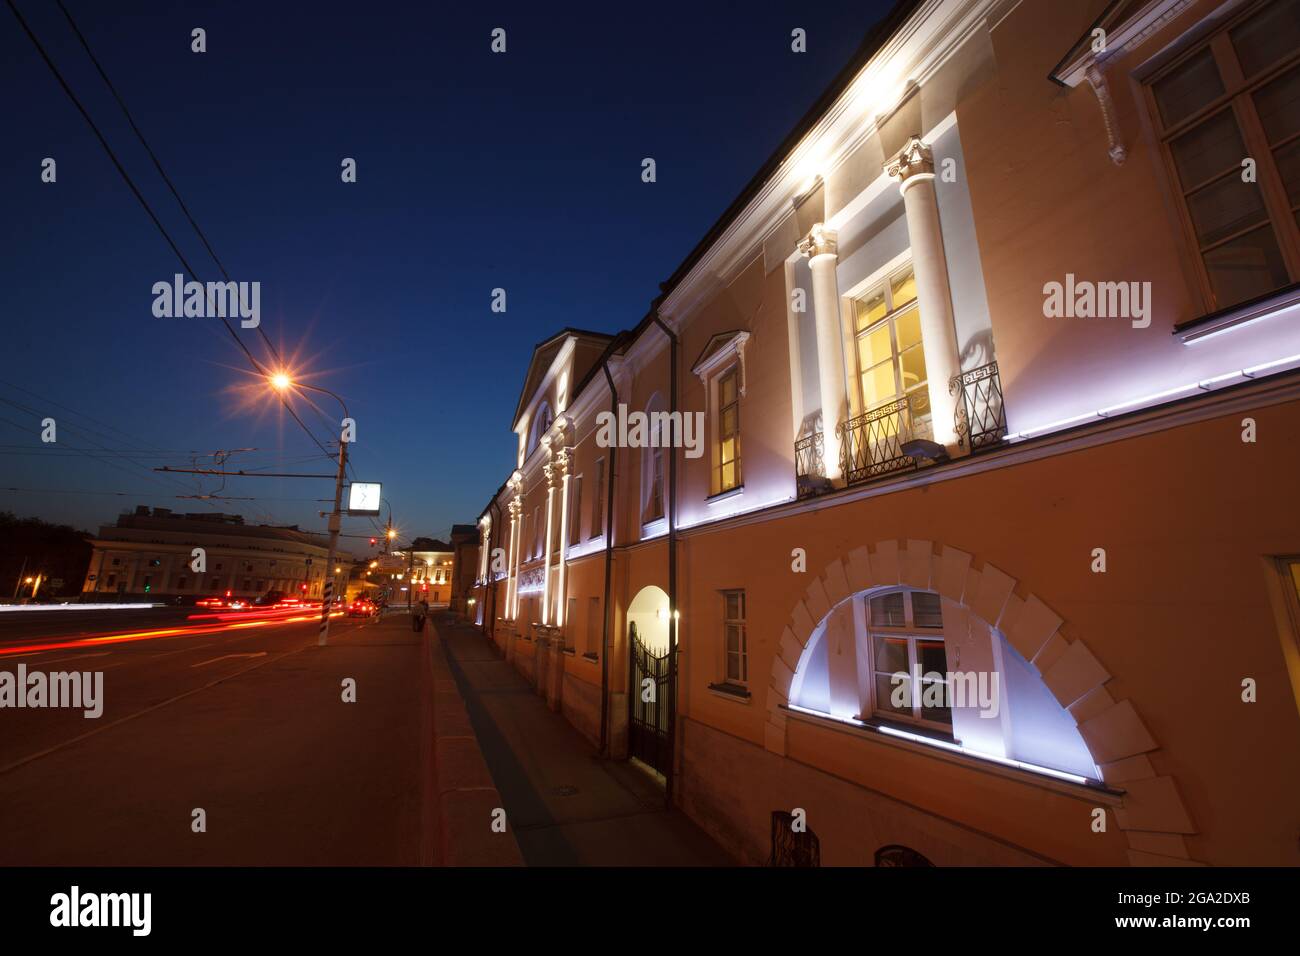 Moscow, Russia - July, 27 2014: Historical building in Moscow center at night. Mansion (right) and road with traces of lights (left) Stock Photo